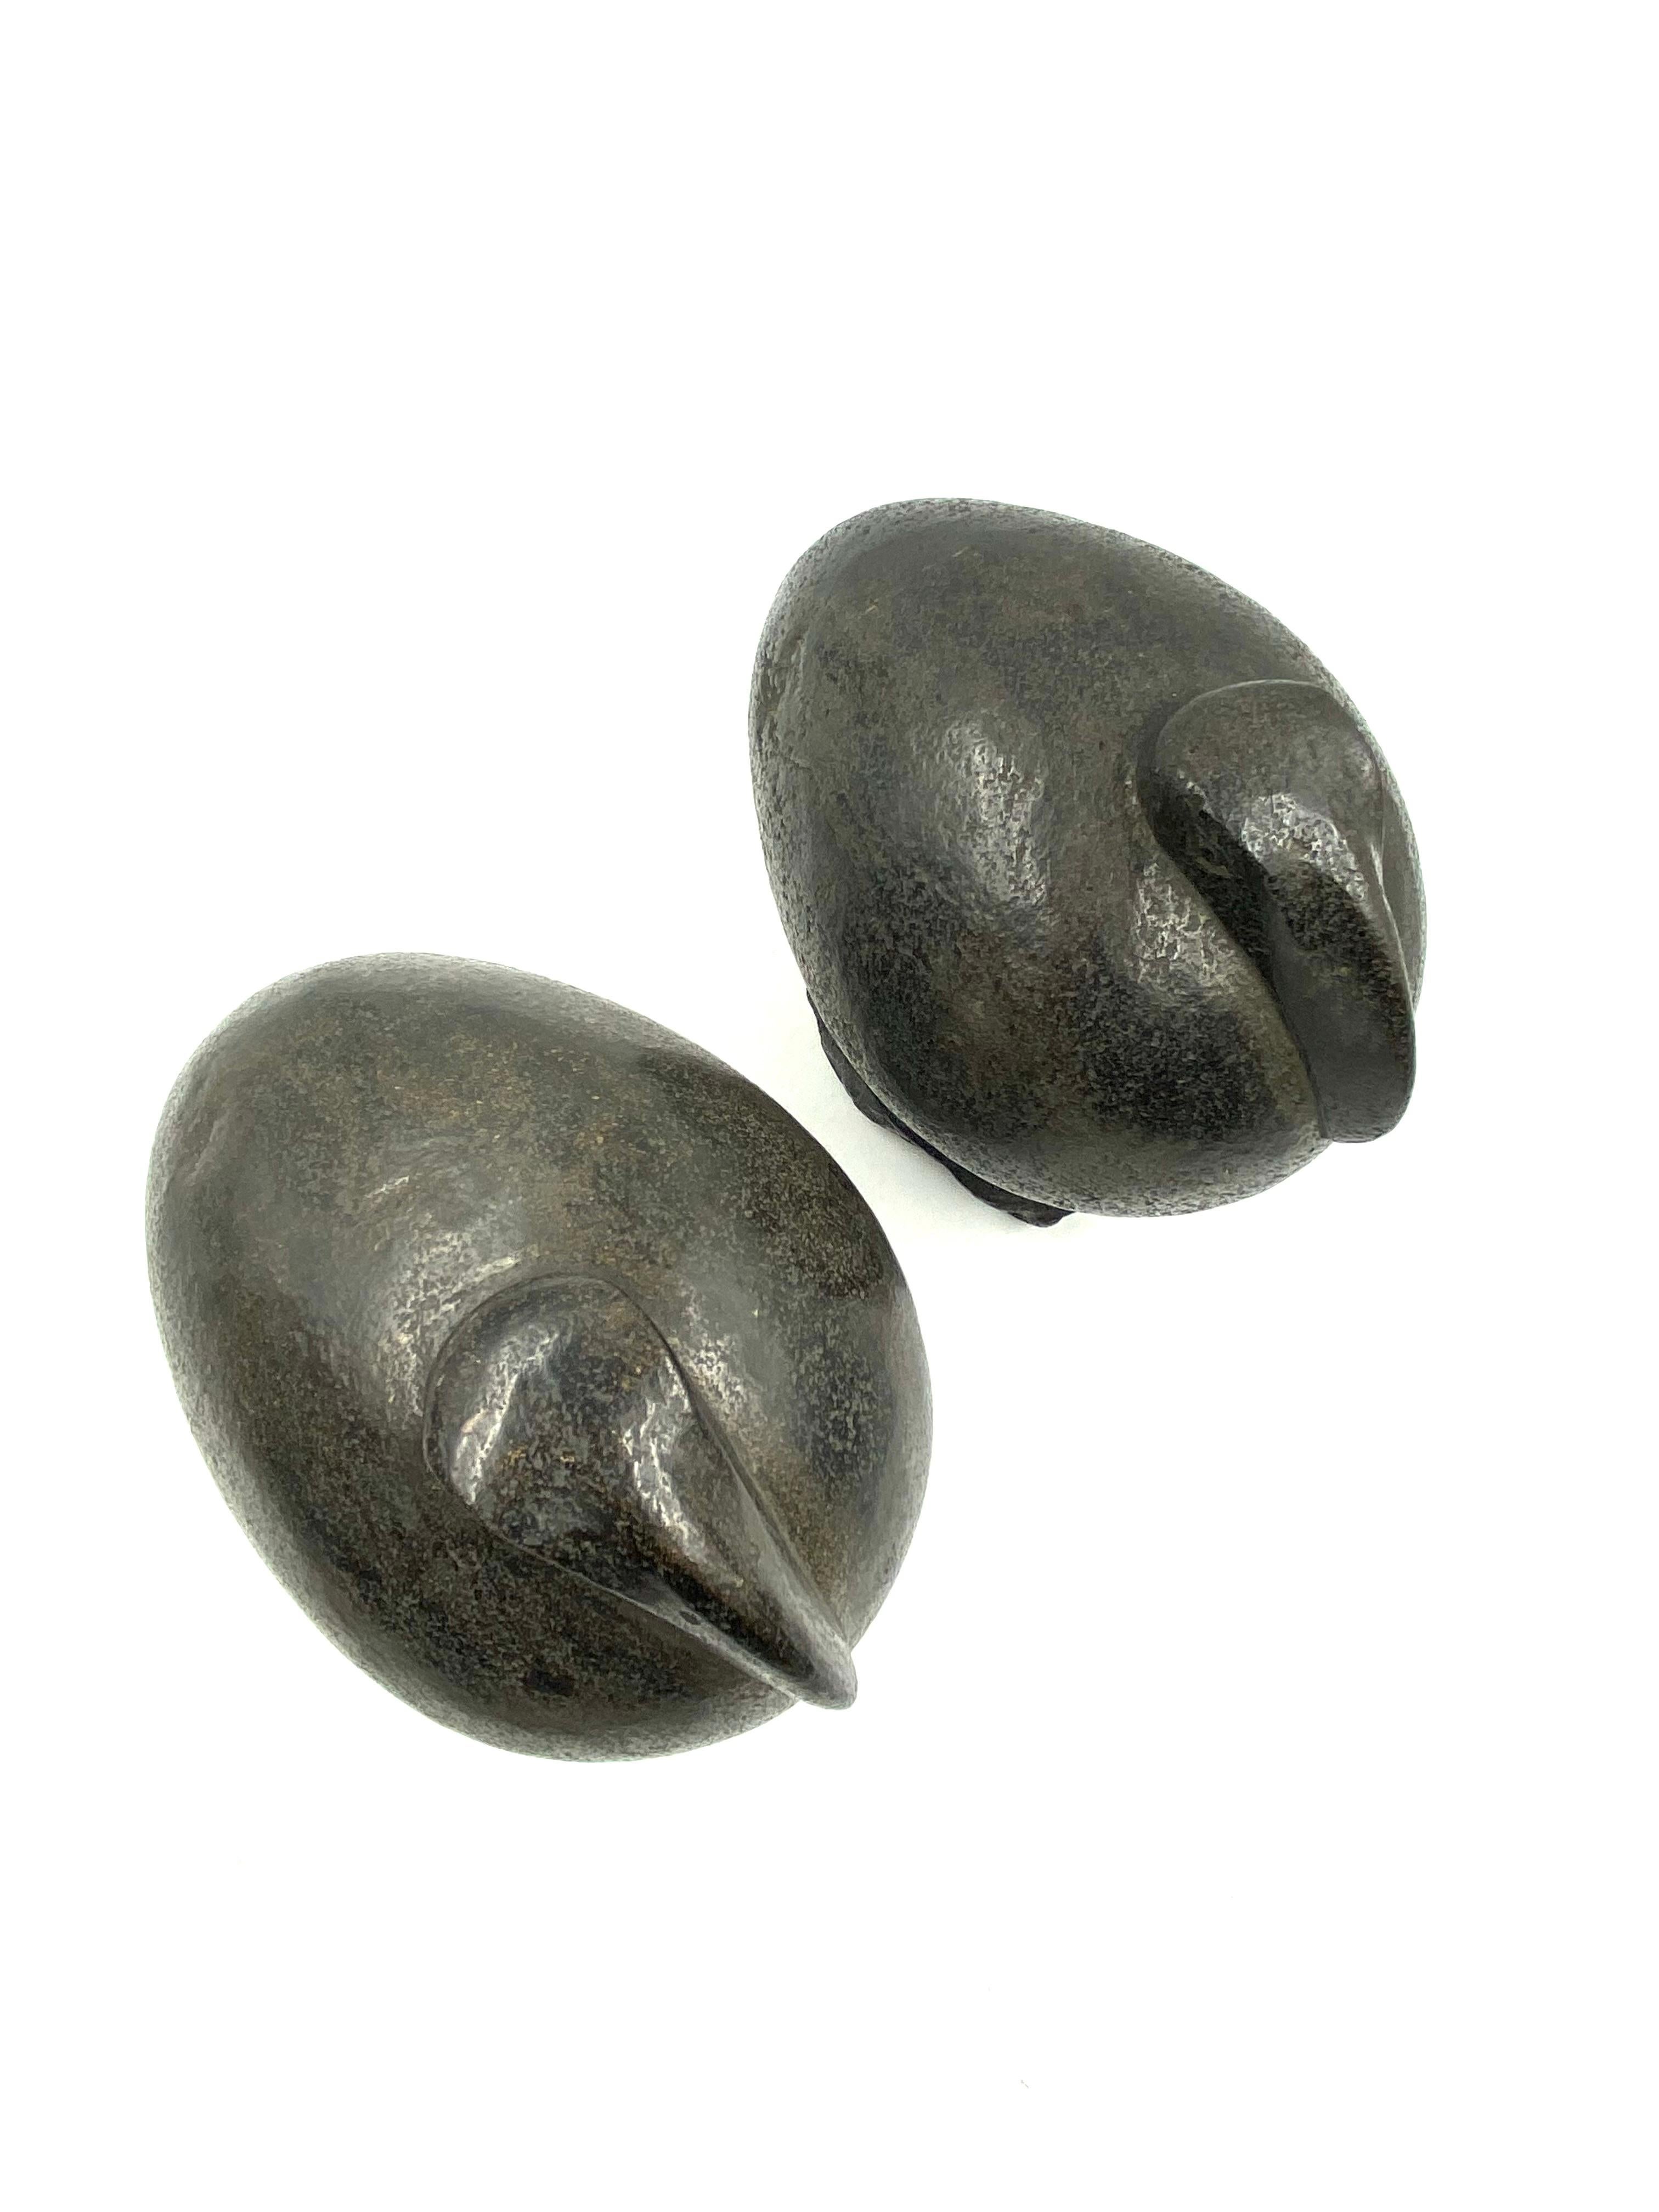 Ibis Birds, Pair of Basalt Ovoid Sculptures, France Early 20th Century 13